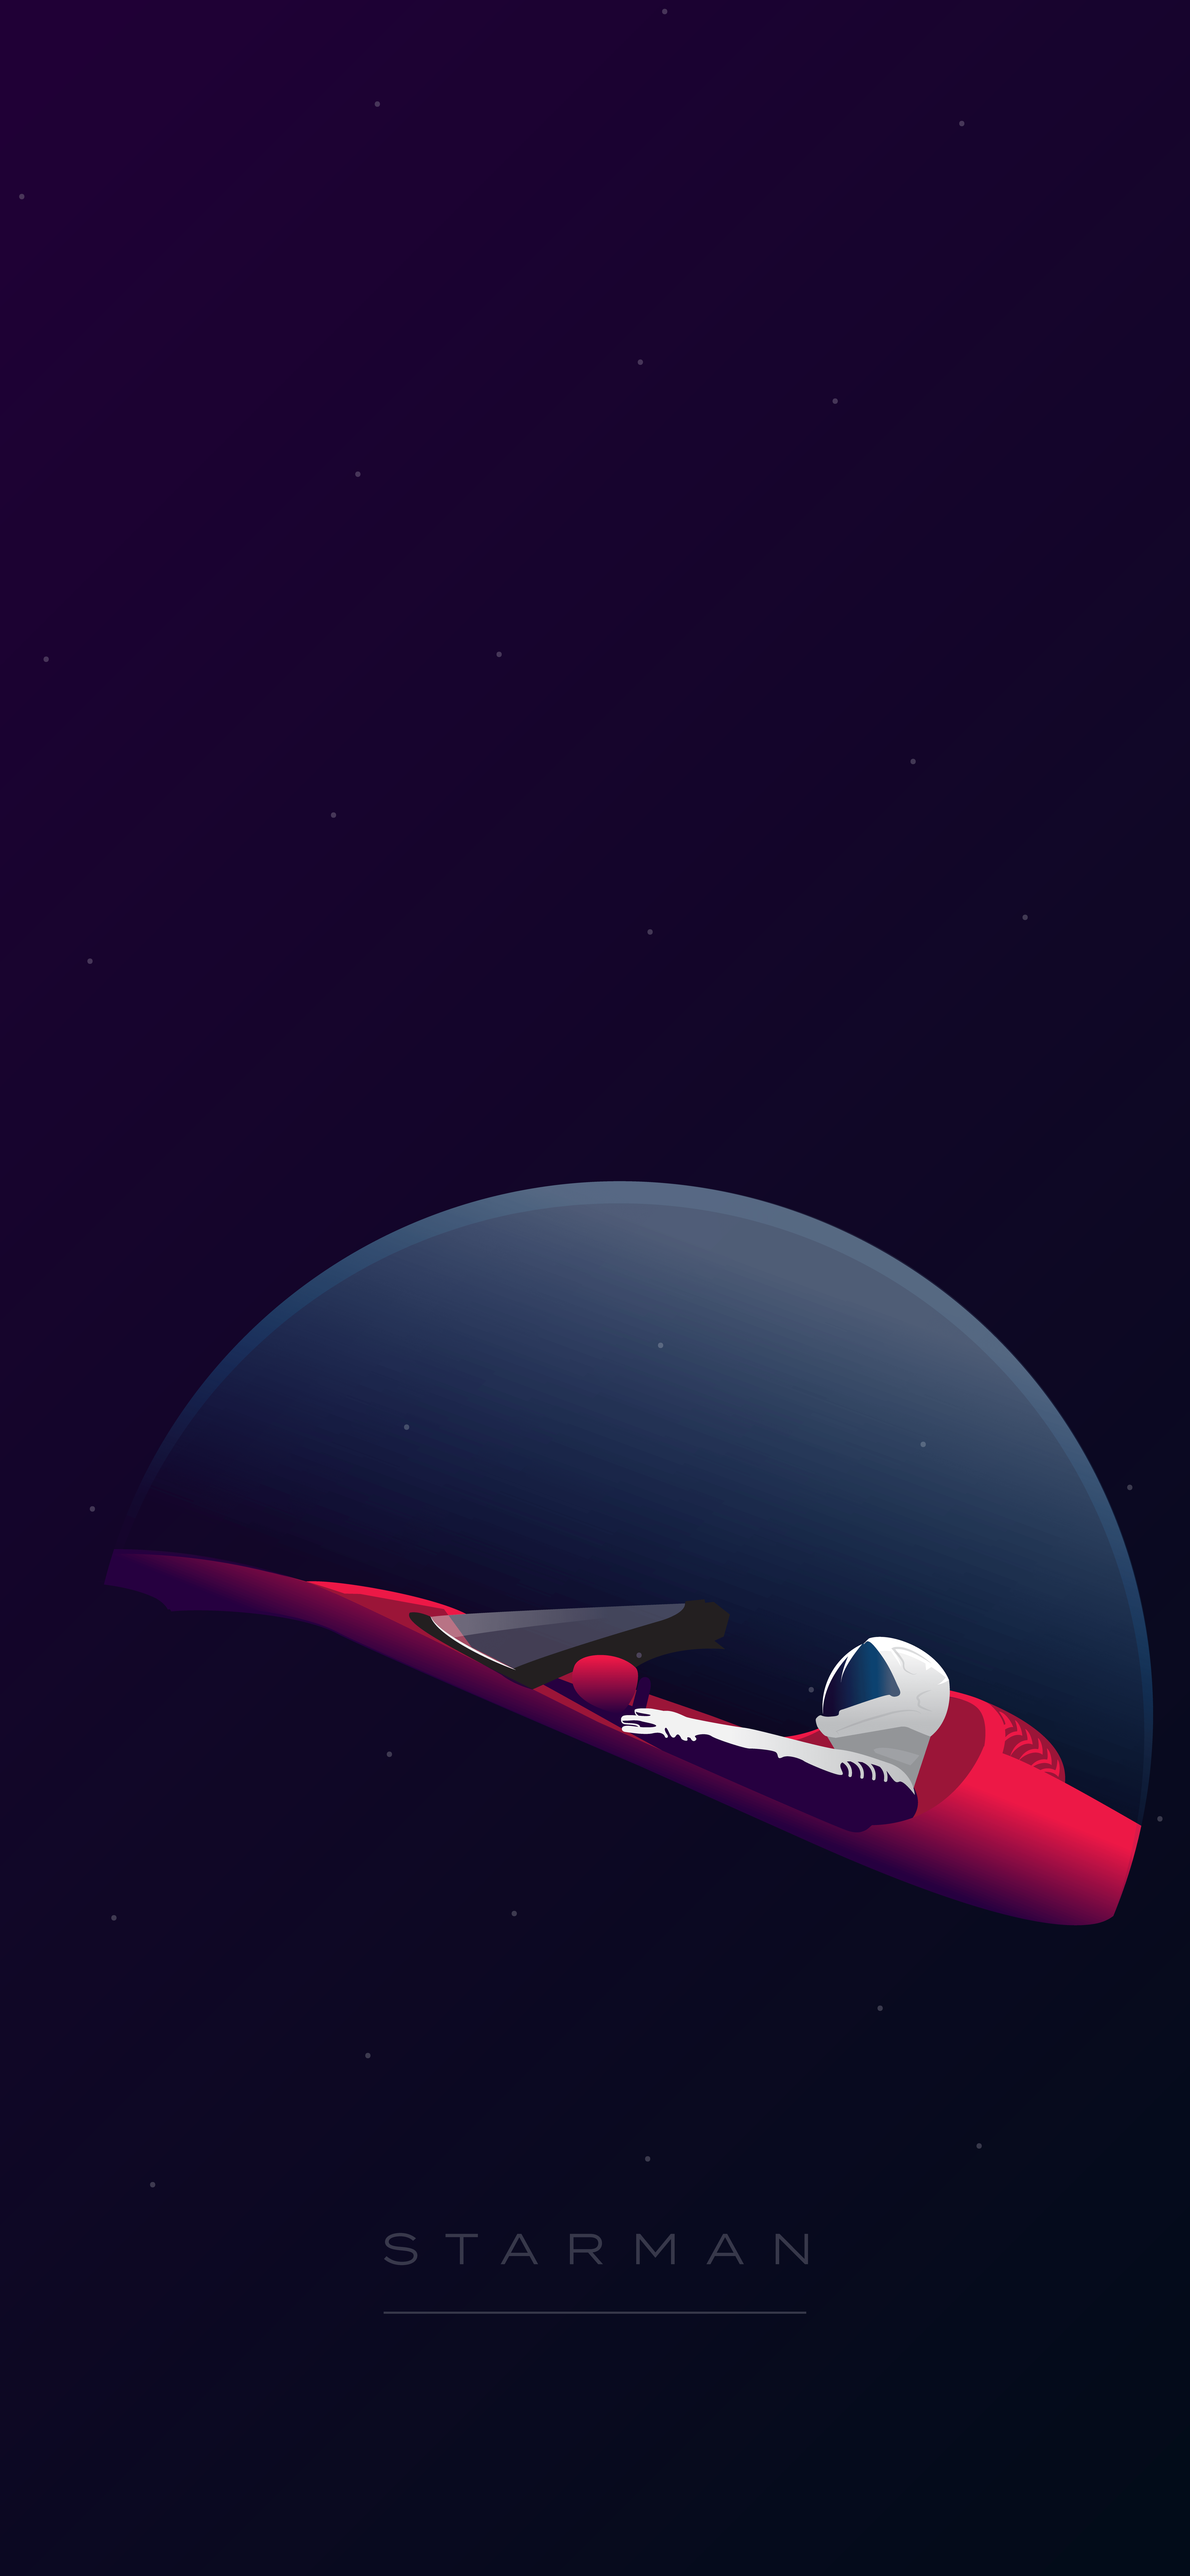 SpaceX Starman Wallpaper Inspired From Falcon Heavy's